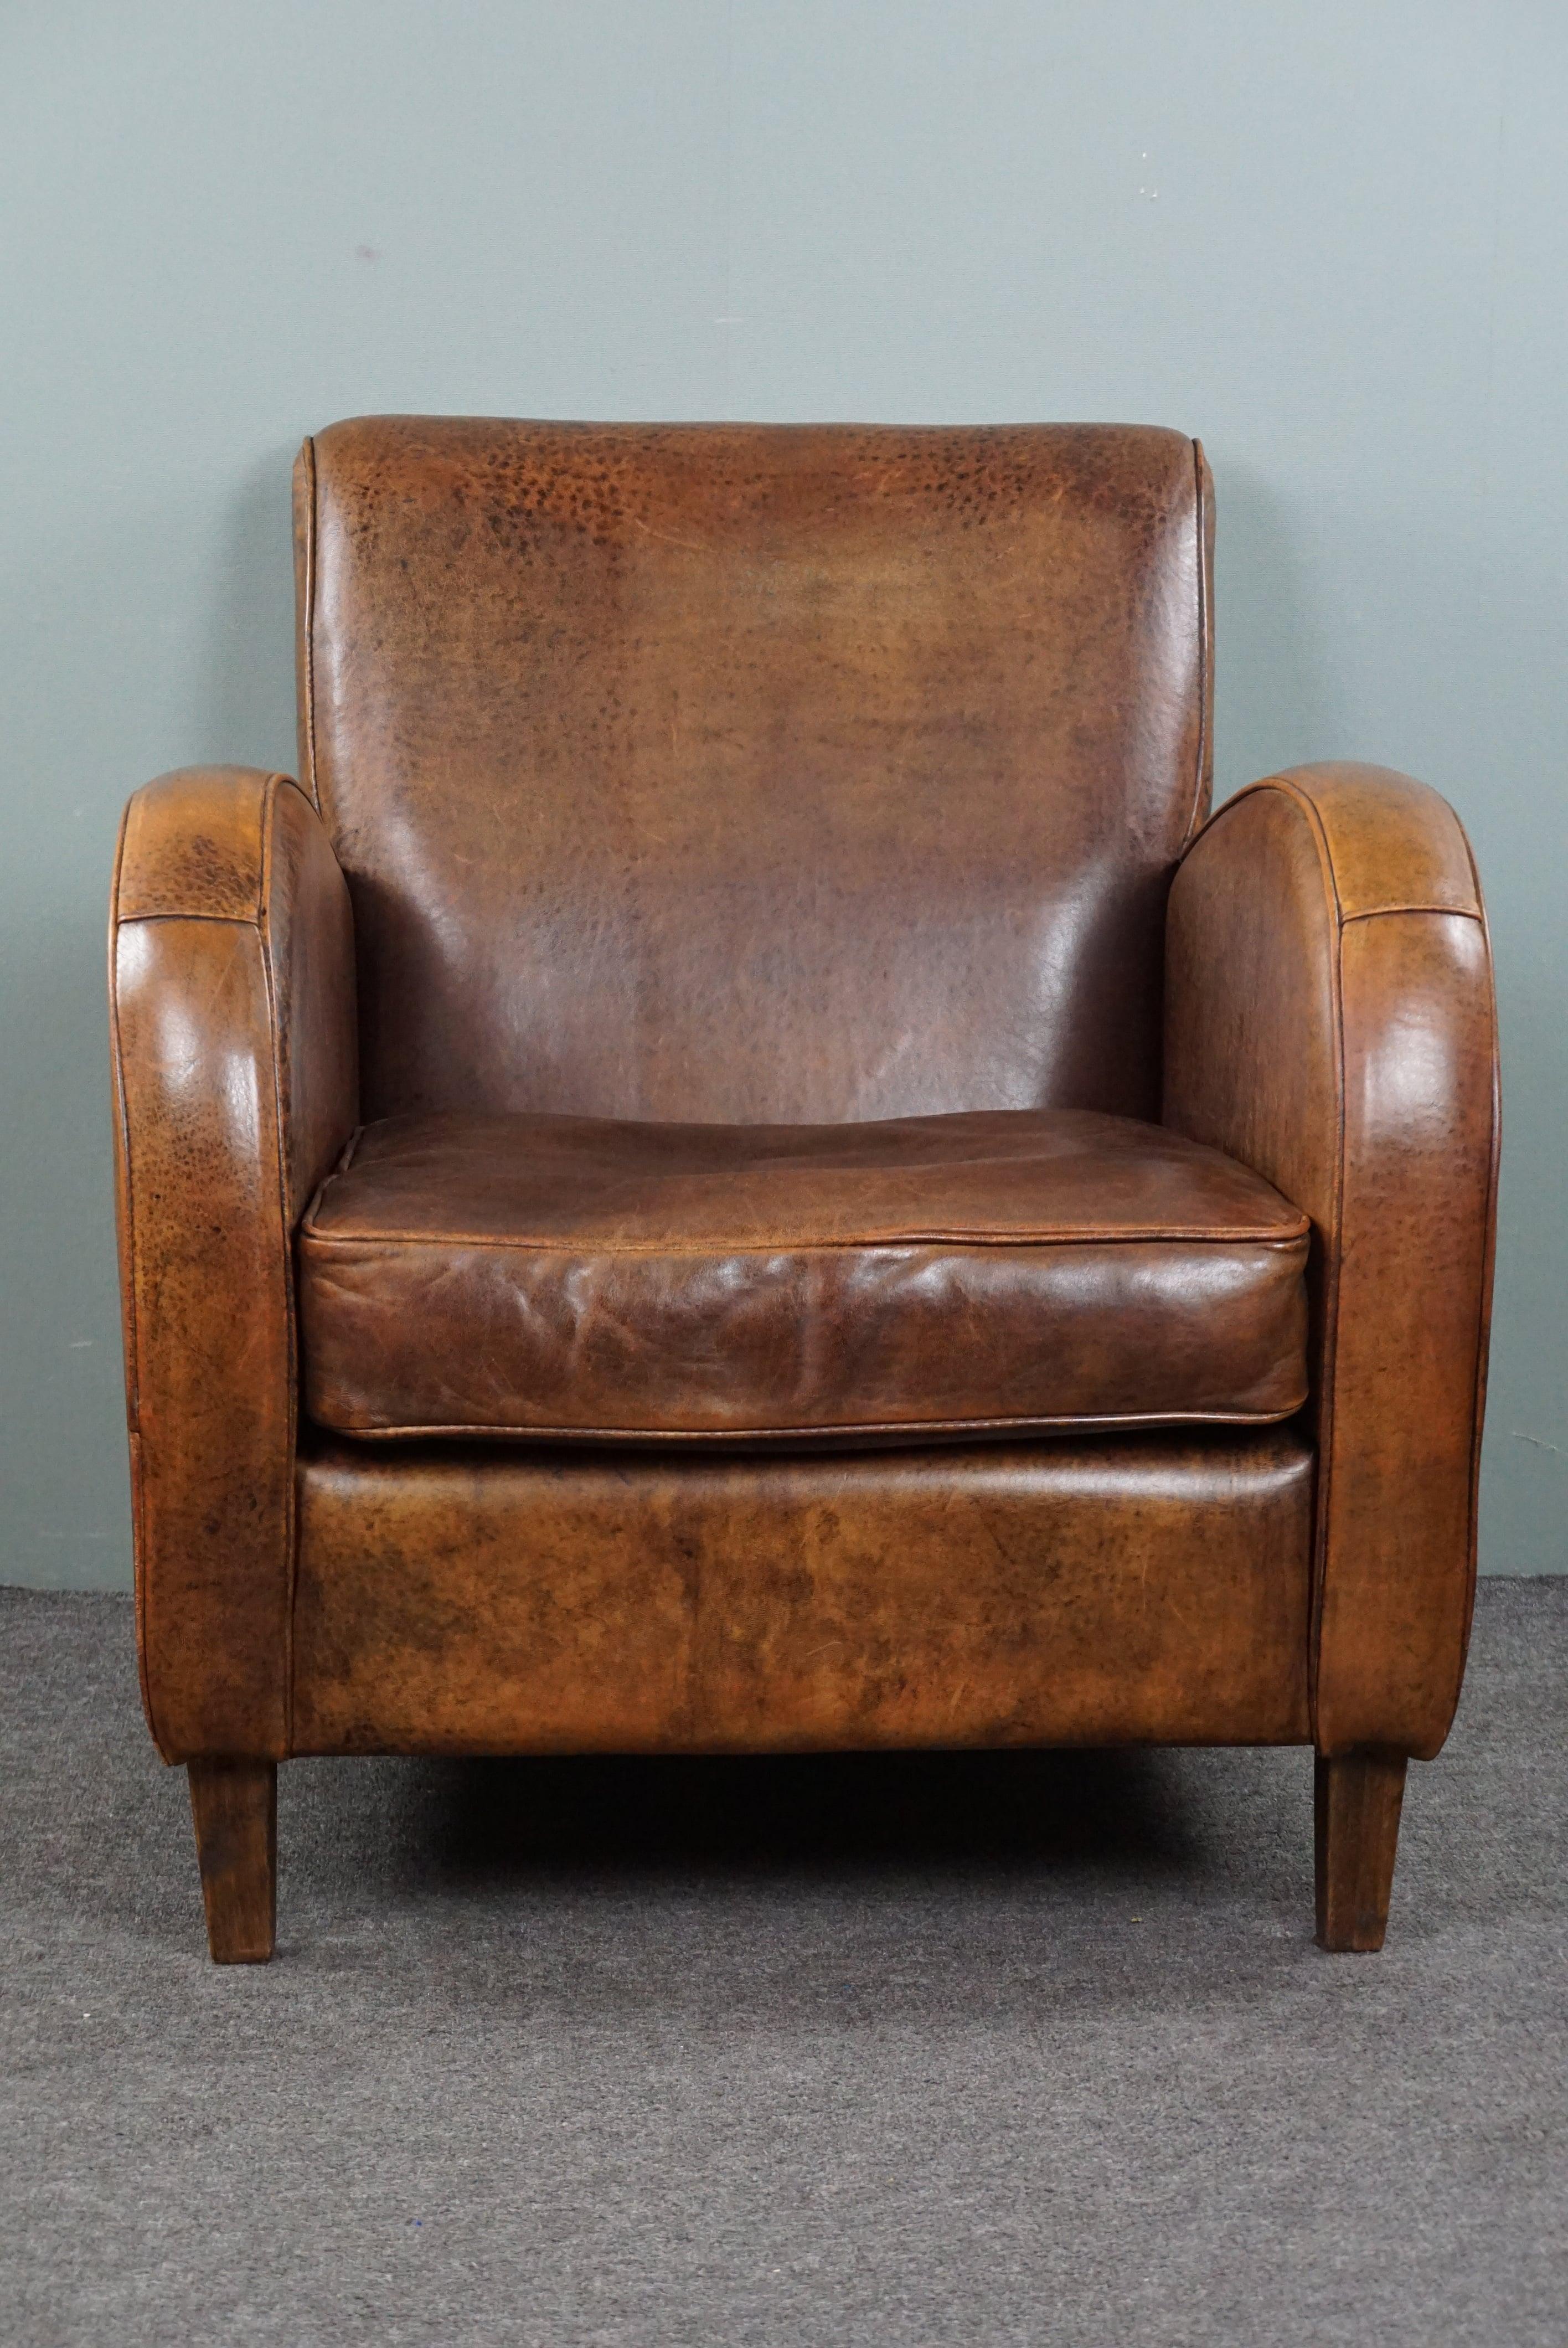 
With pride we offer you this beautiful and comfortable sheep leather armchair. Sleekly designed comfortable sheep leather design armchair.

This lovely sheep leather armchair is executed in a beautifully deep warm color, has a striking design,